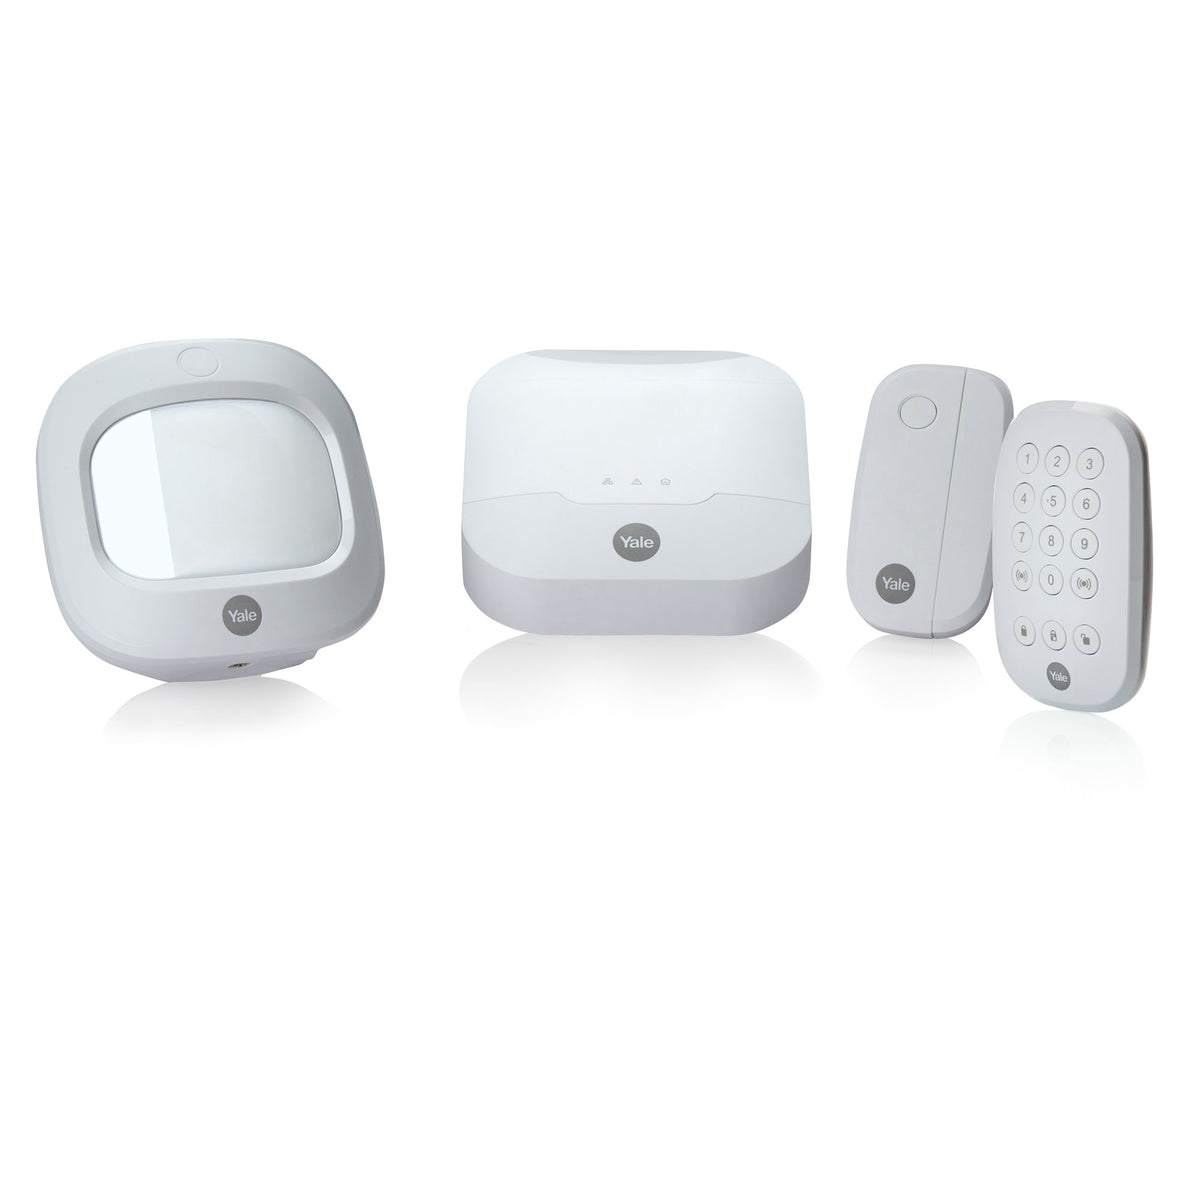 Yale Smart Living IA-312 - Starter Kit - home security system - wireless - 868 MHz